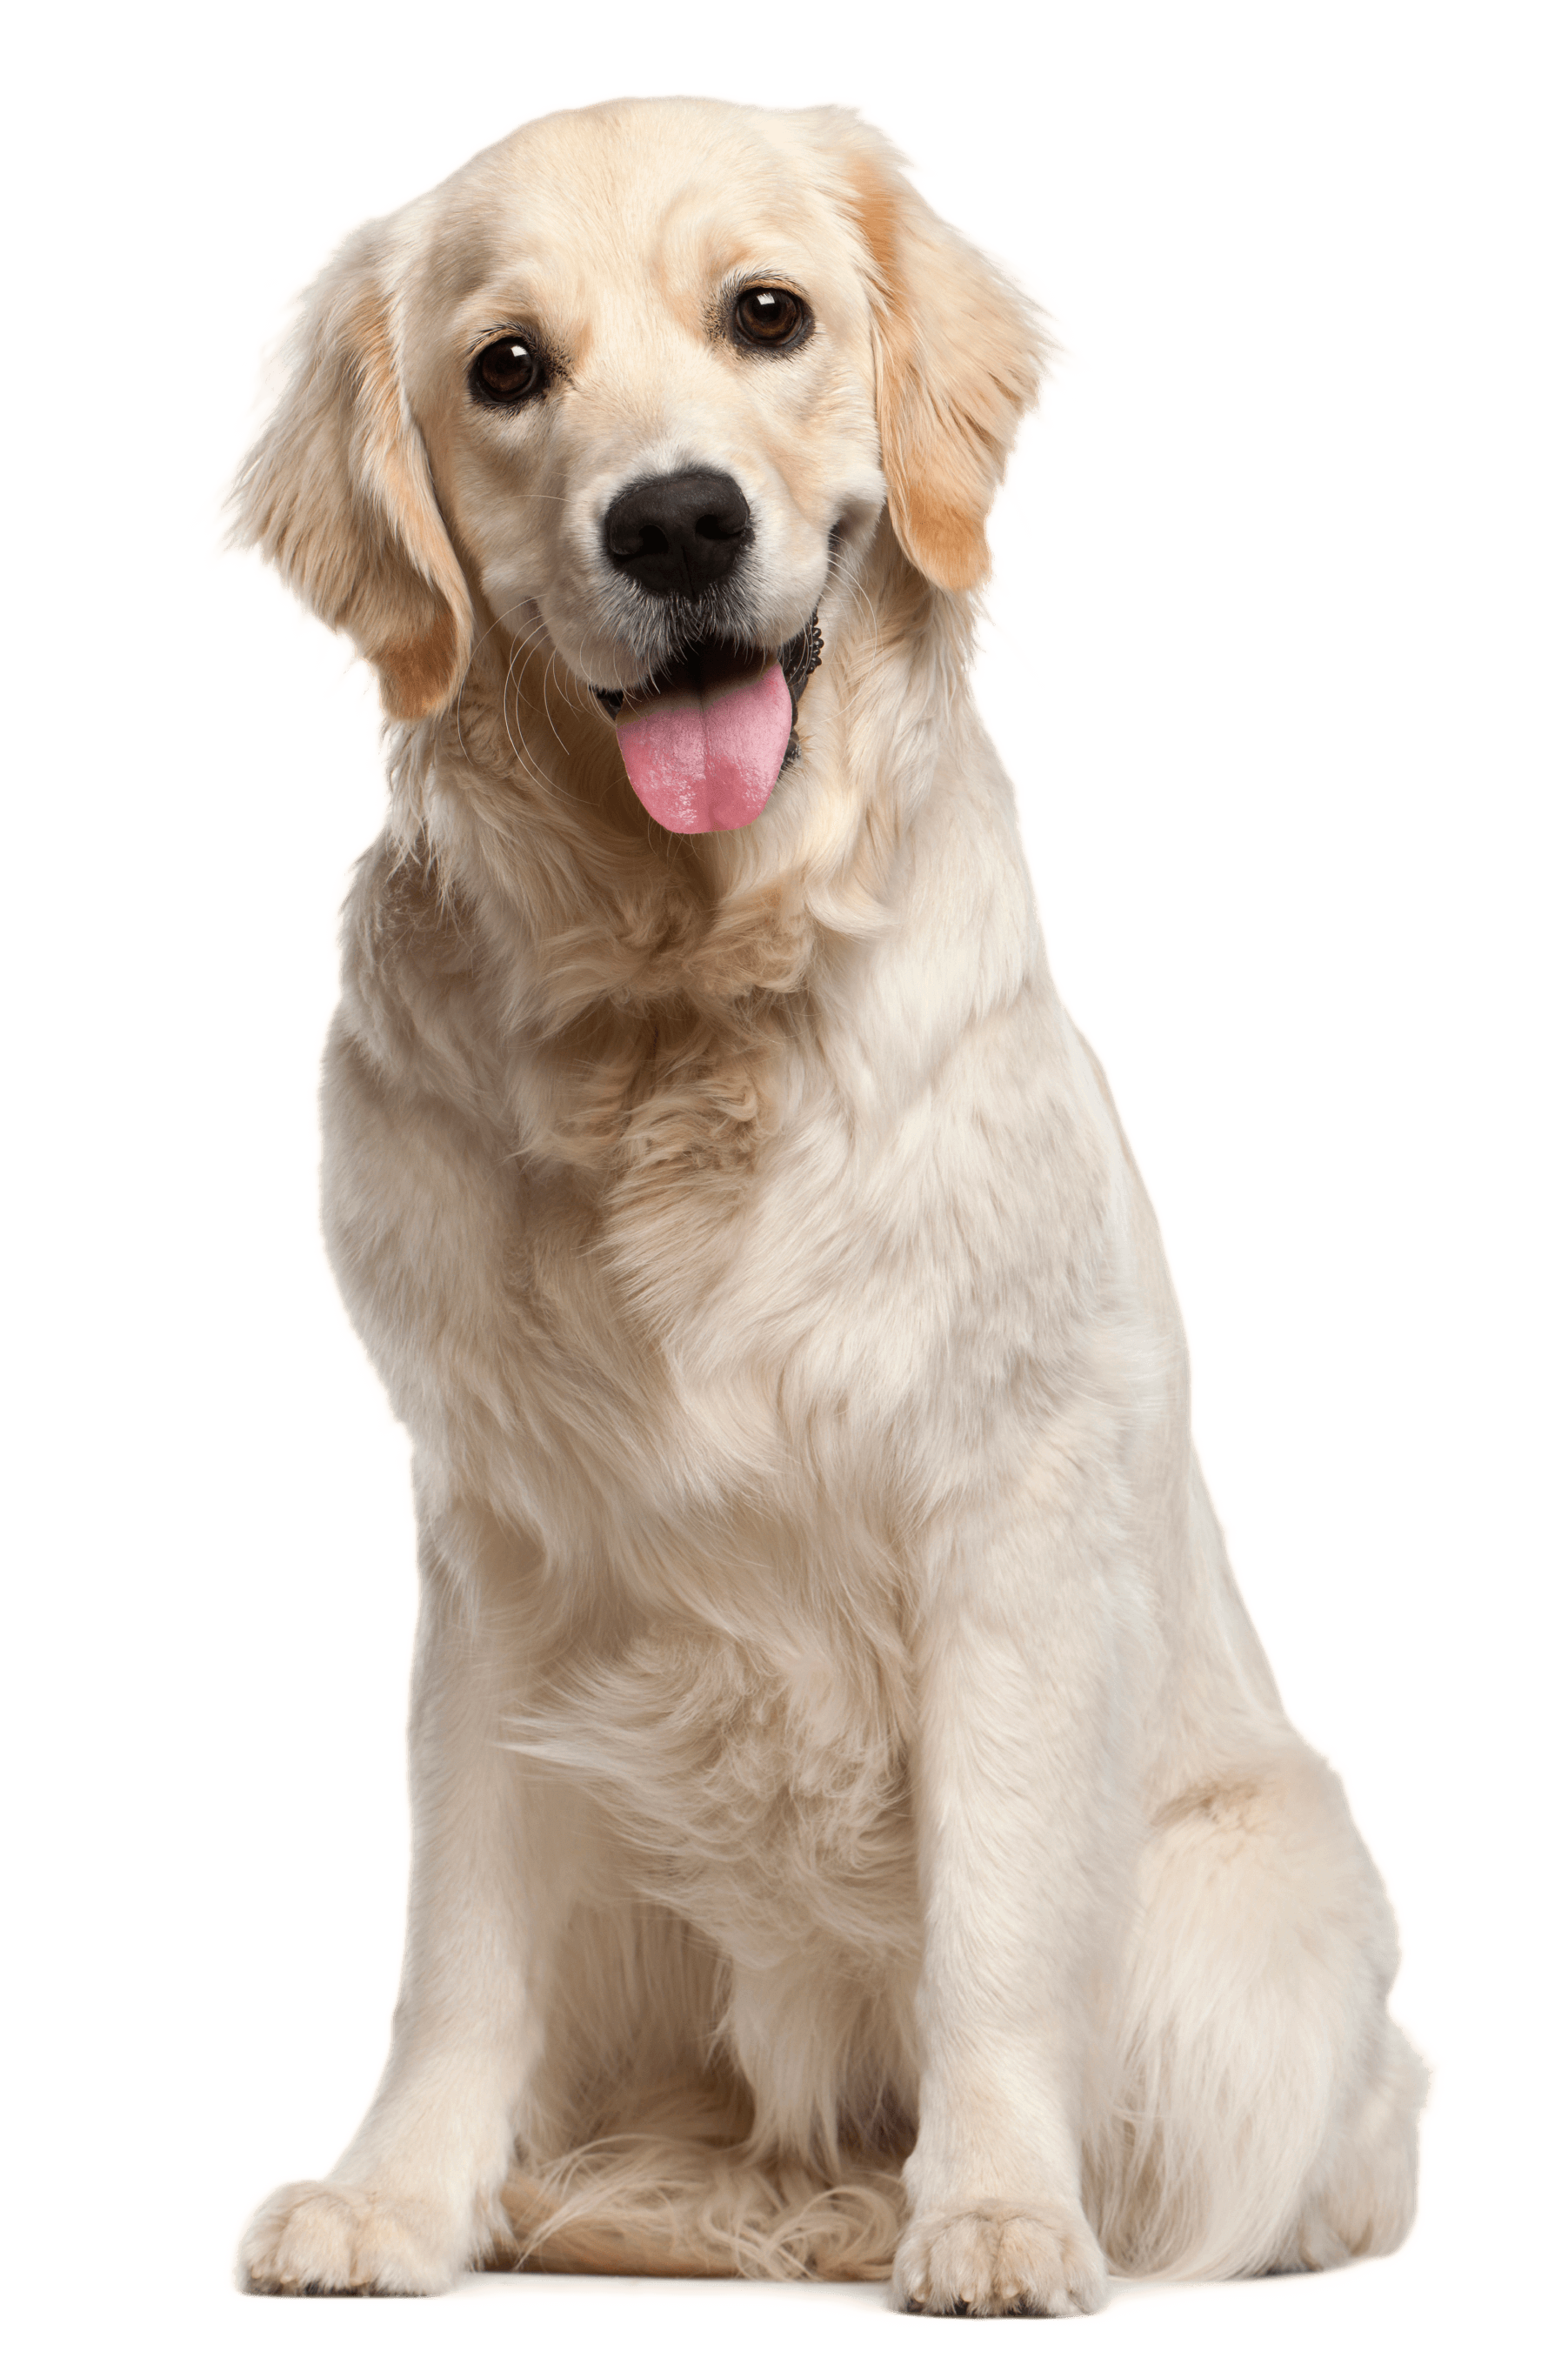 Dog File Png Image - Birthday Dog, Transparent background PNG HD thumbnail